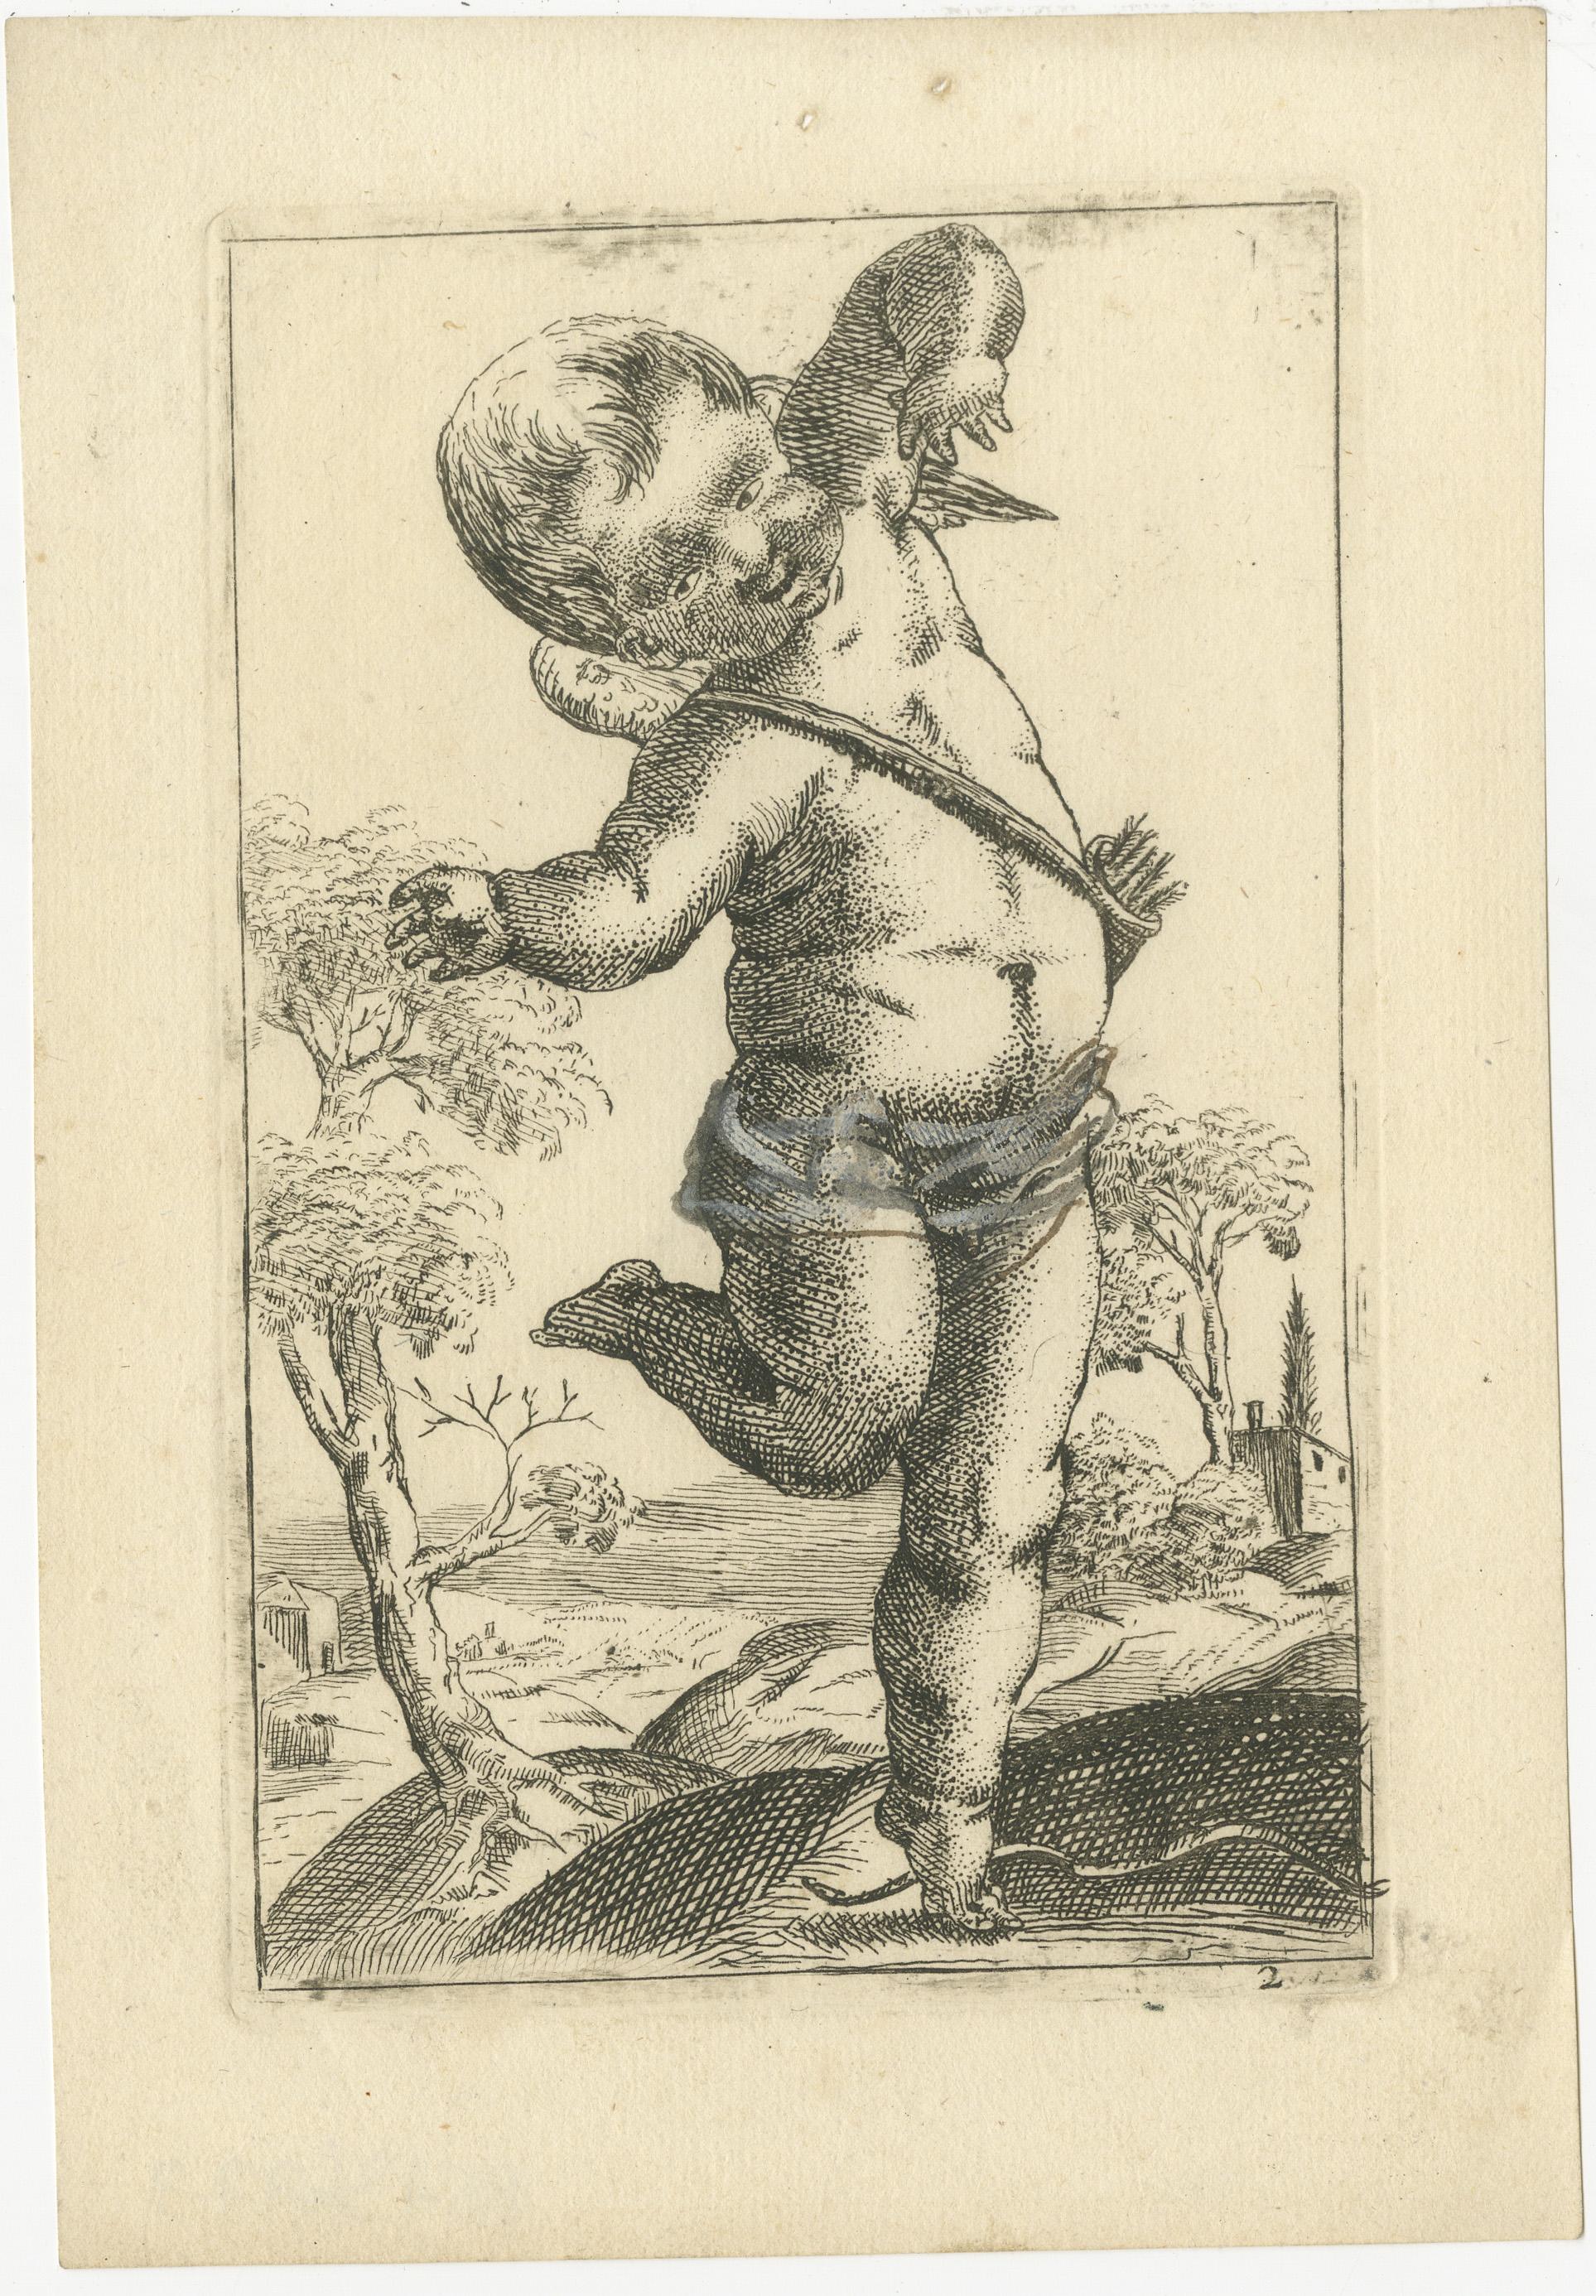 These images are rare but fine examples of original 17th-century European engravings, displaying characteristics that might point to an Italian origin based on stylistic analysis. They depict putti, cherubic figures commonly featured in Baroque art.